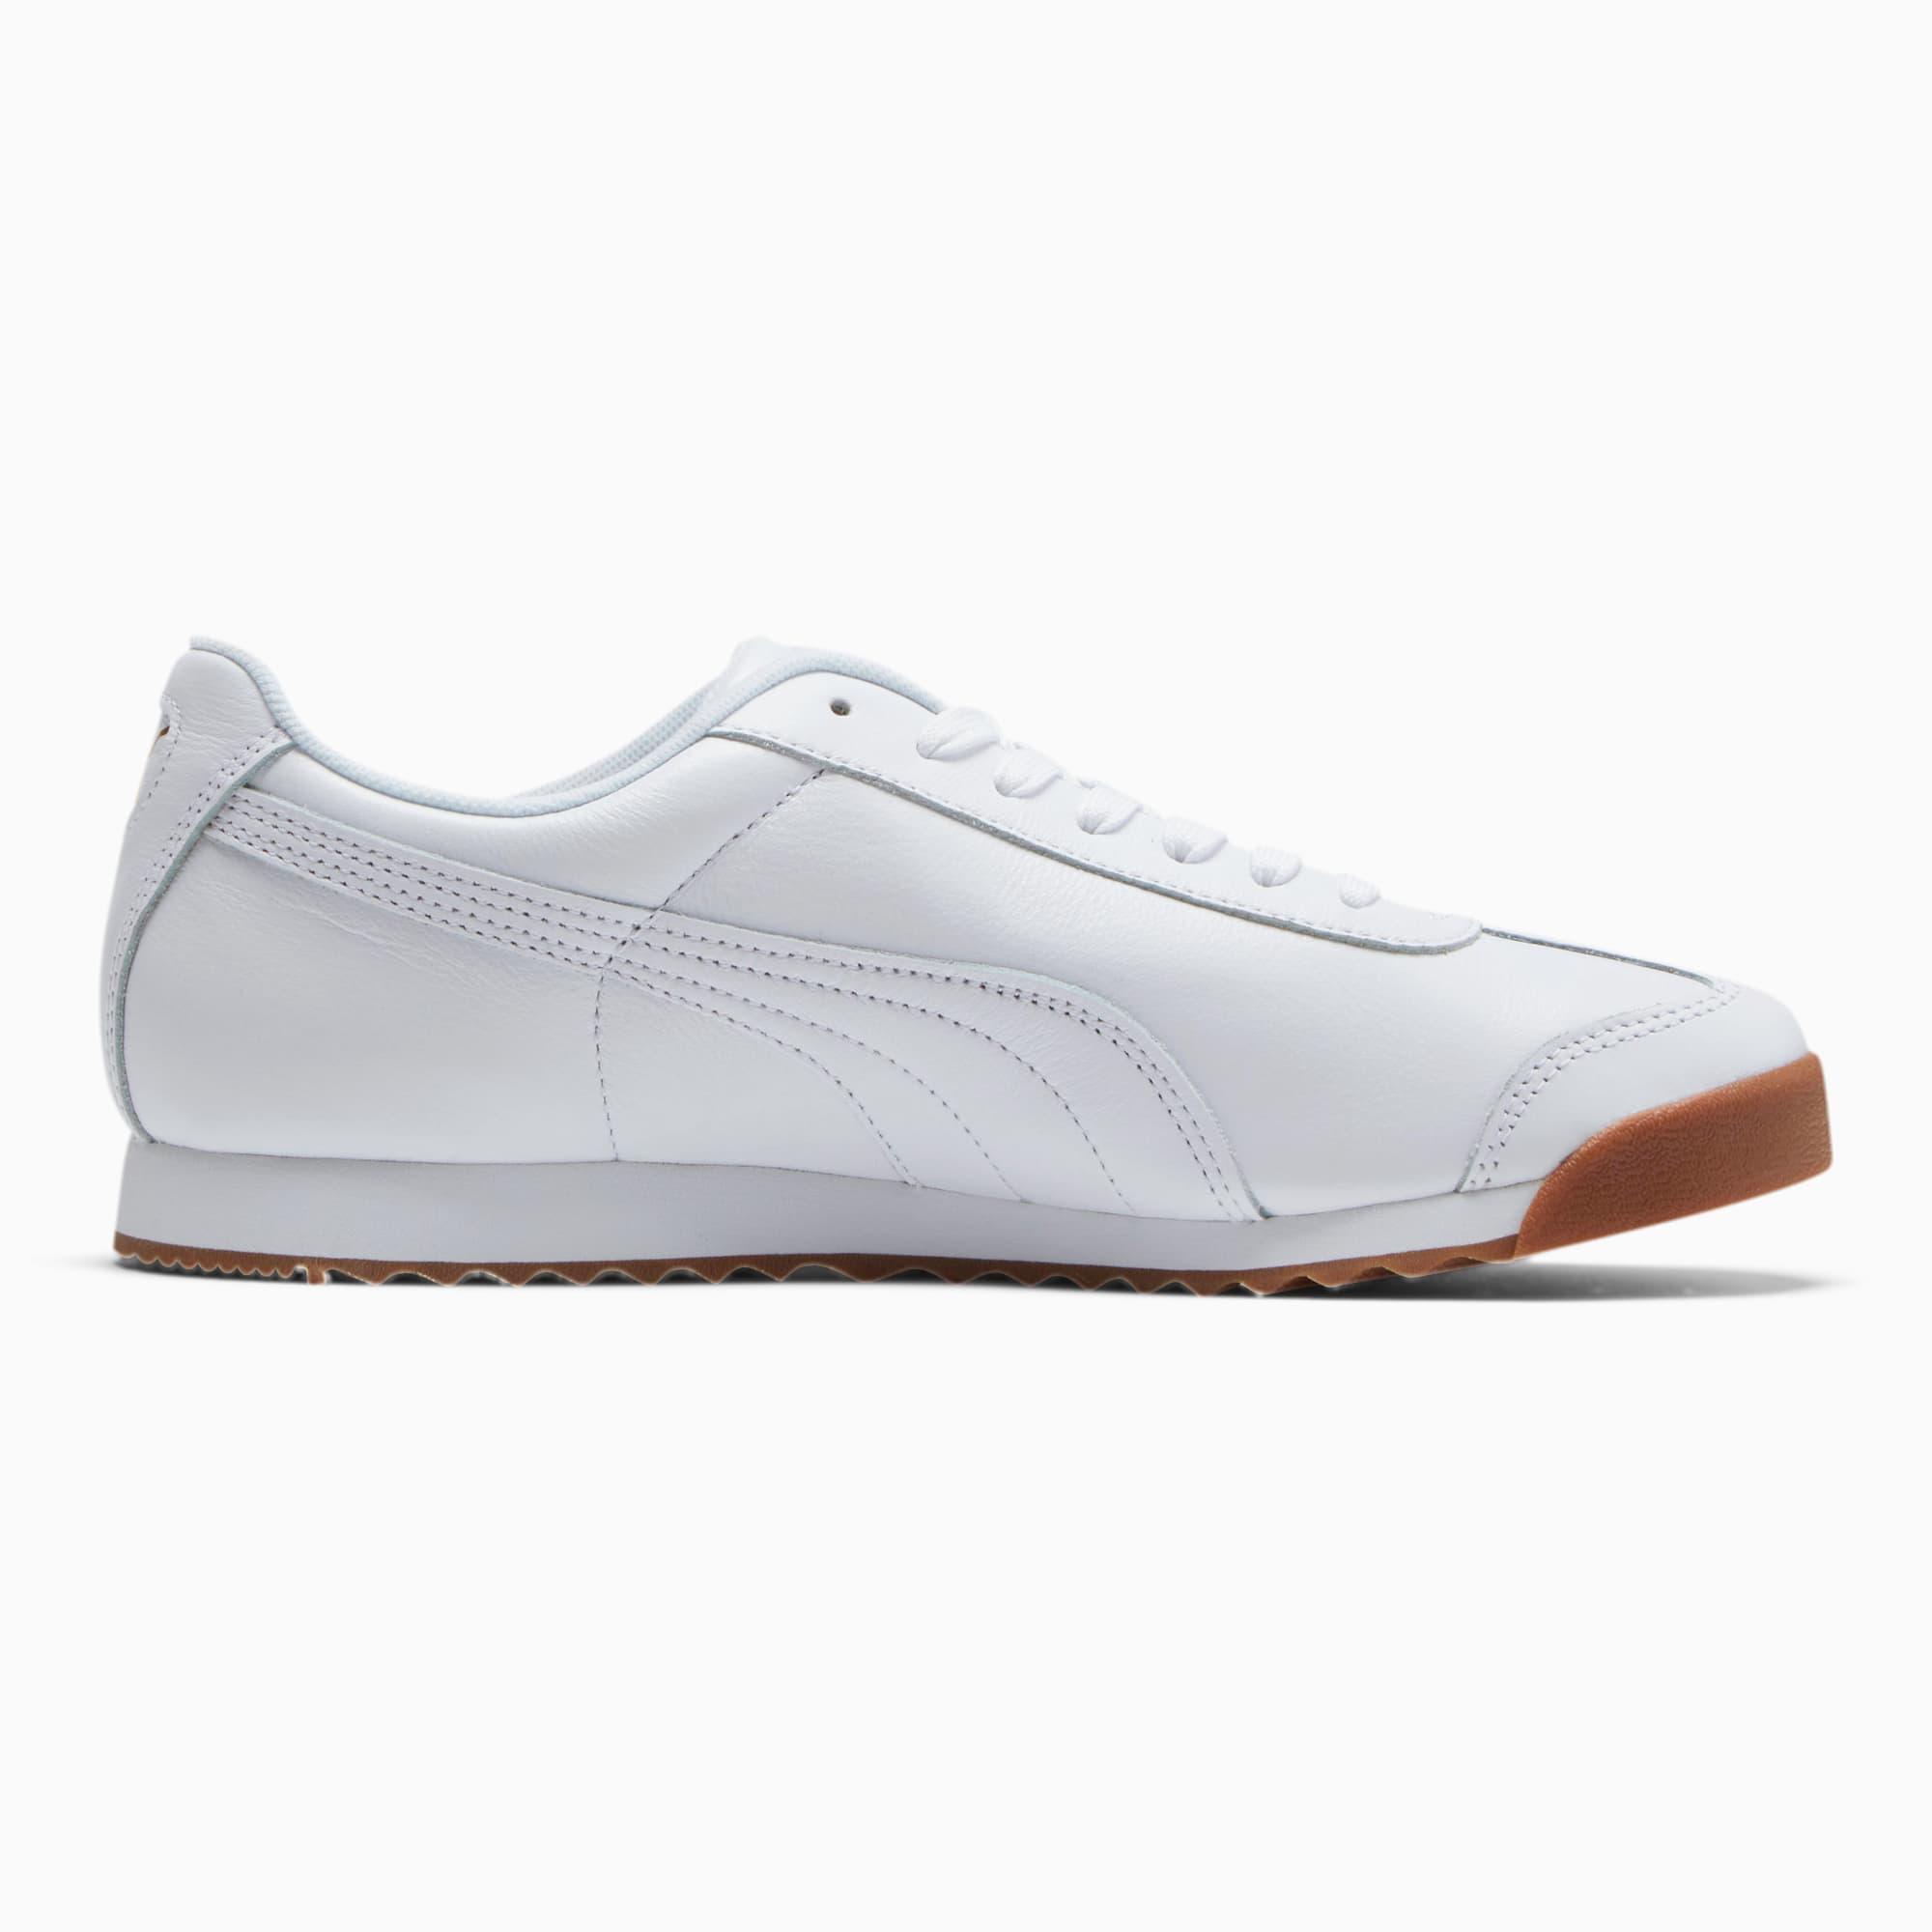 PUMA Leather Roma Classic Gum Sneakers in 01 (White) for Men - Lyst